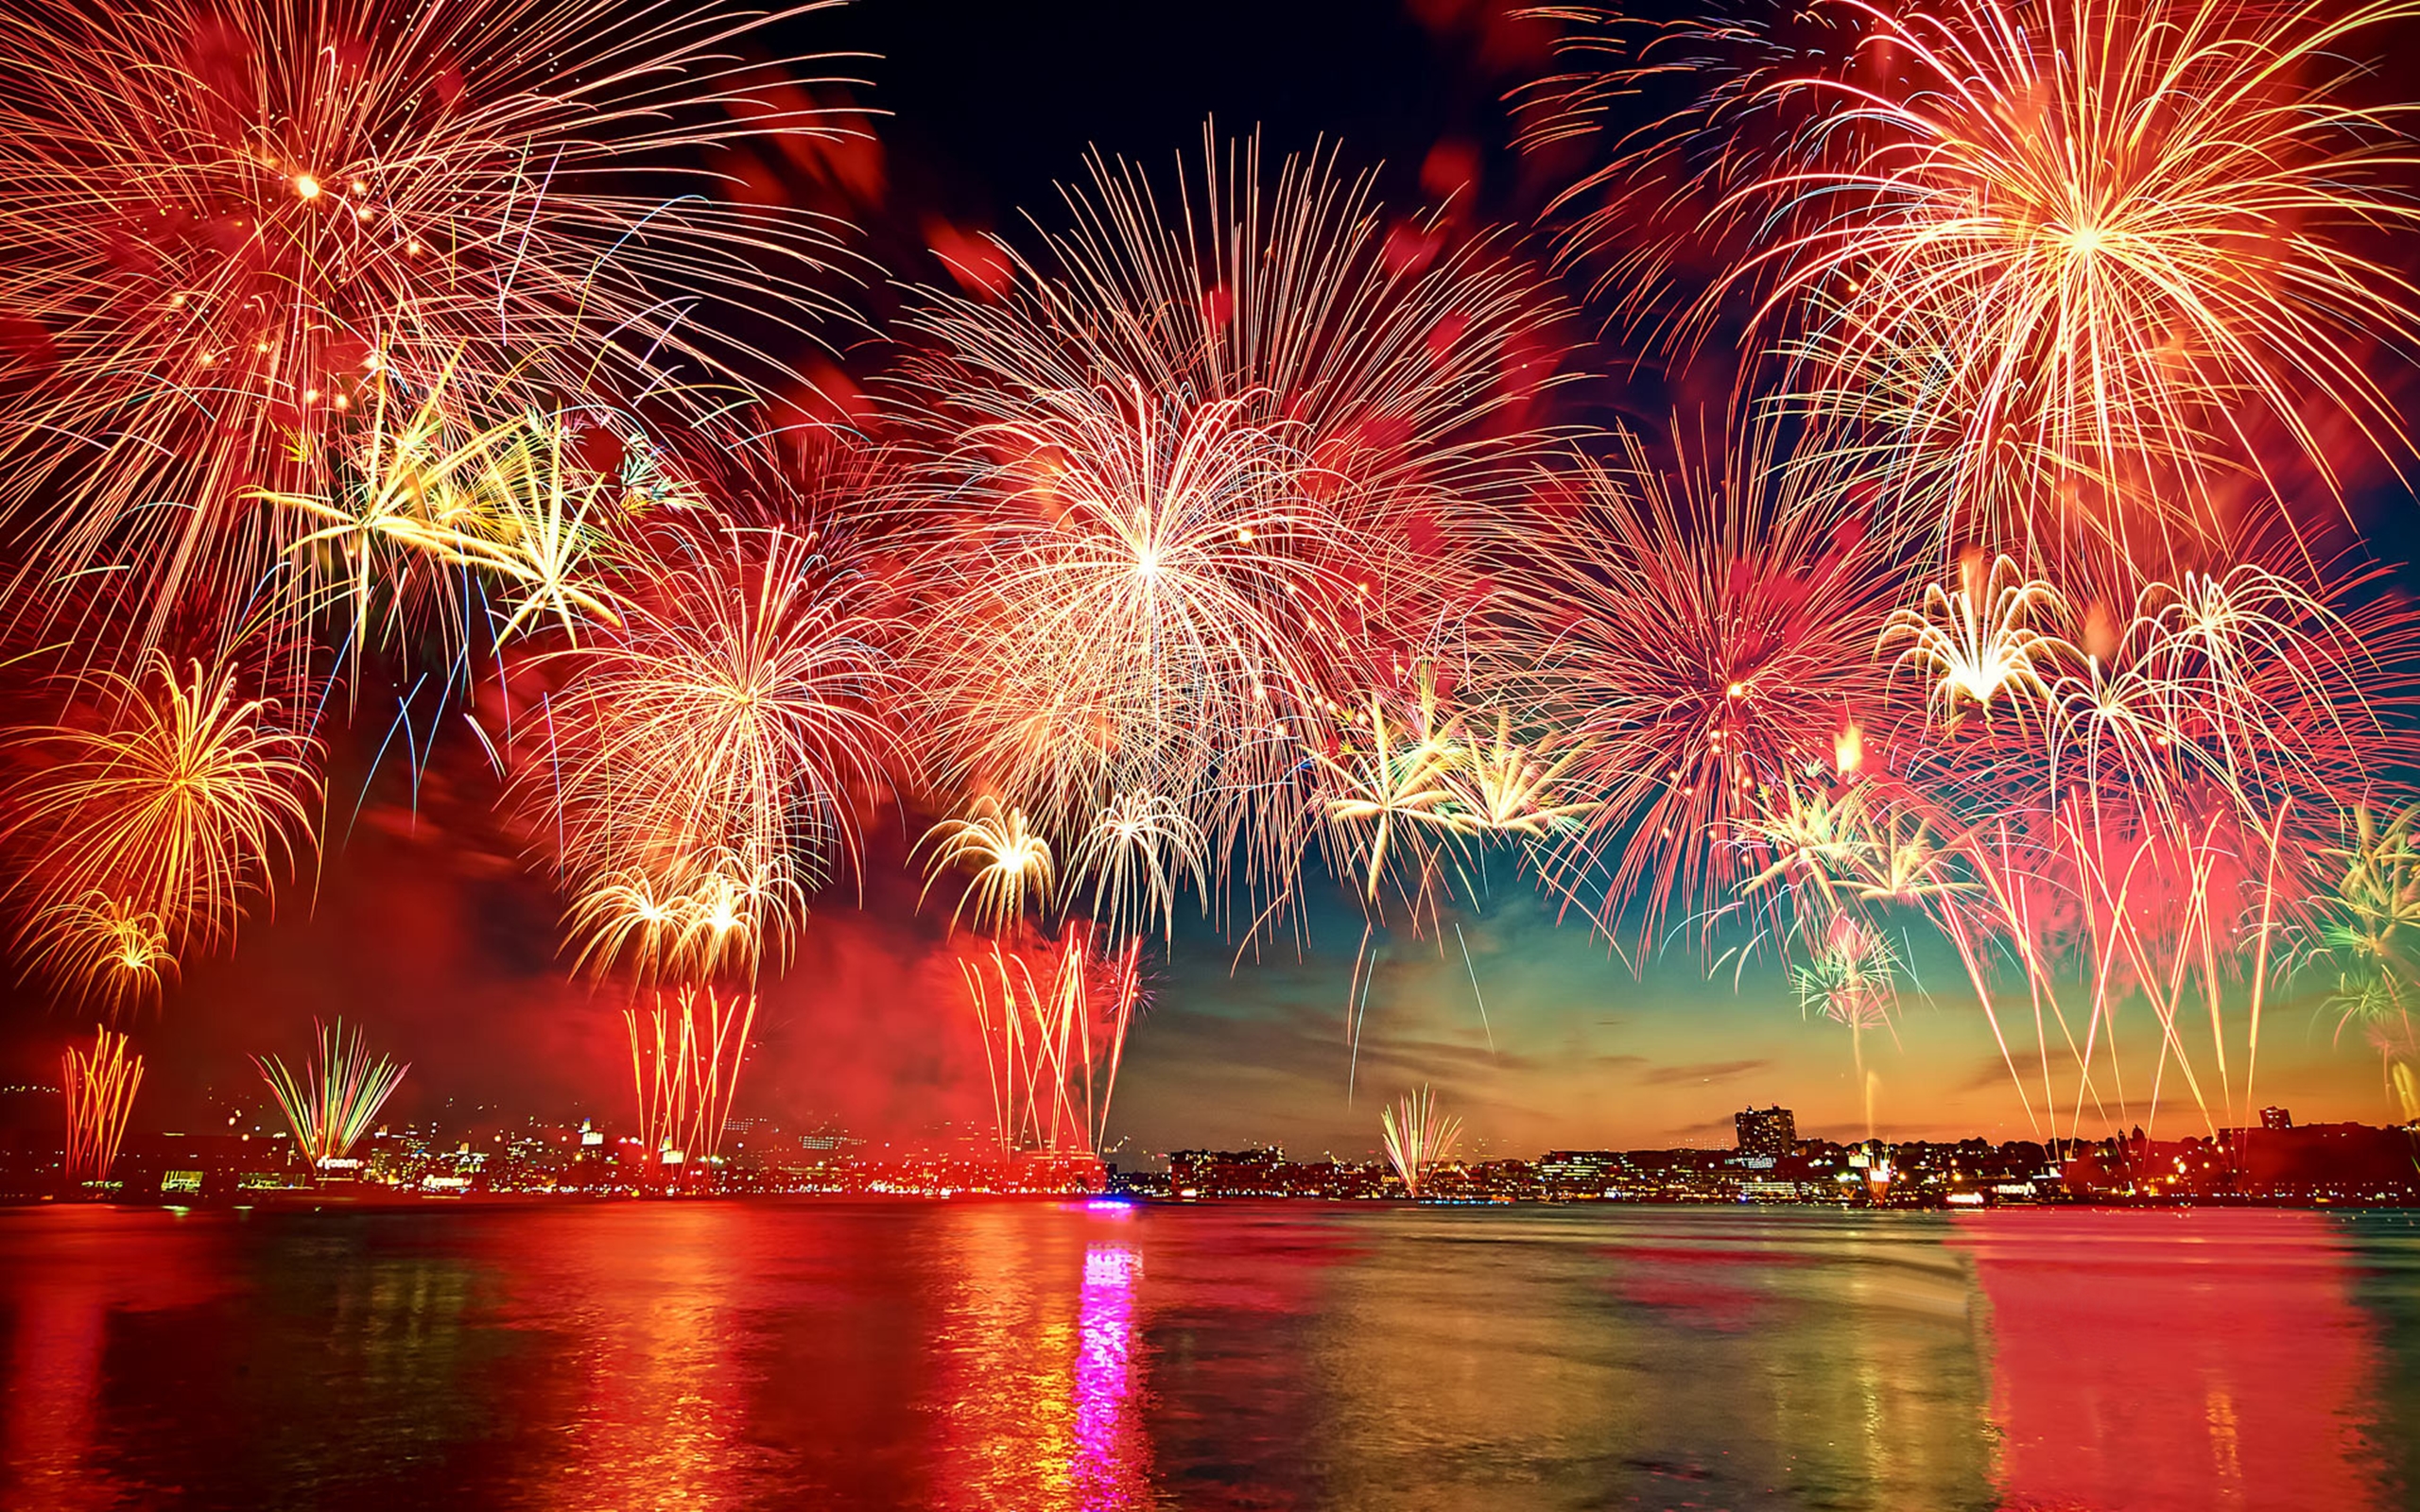 new beautiful wallpapers,fireworks,nature,new years day,red,new year